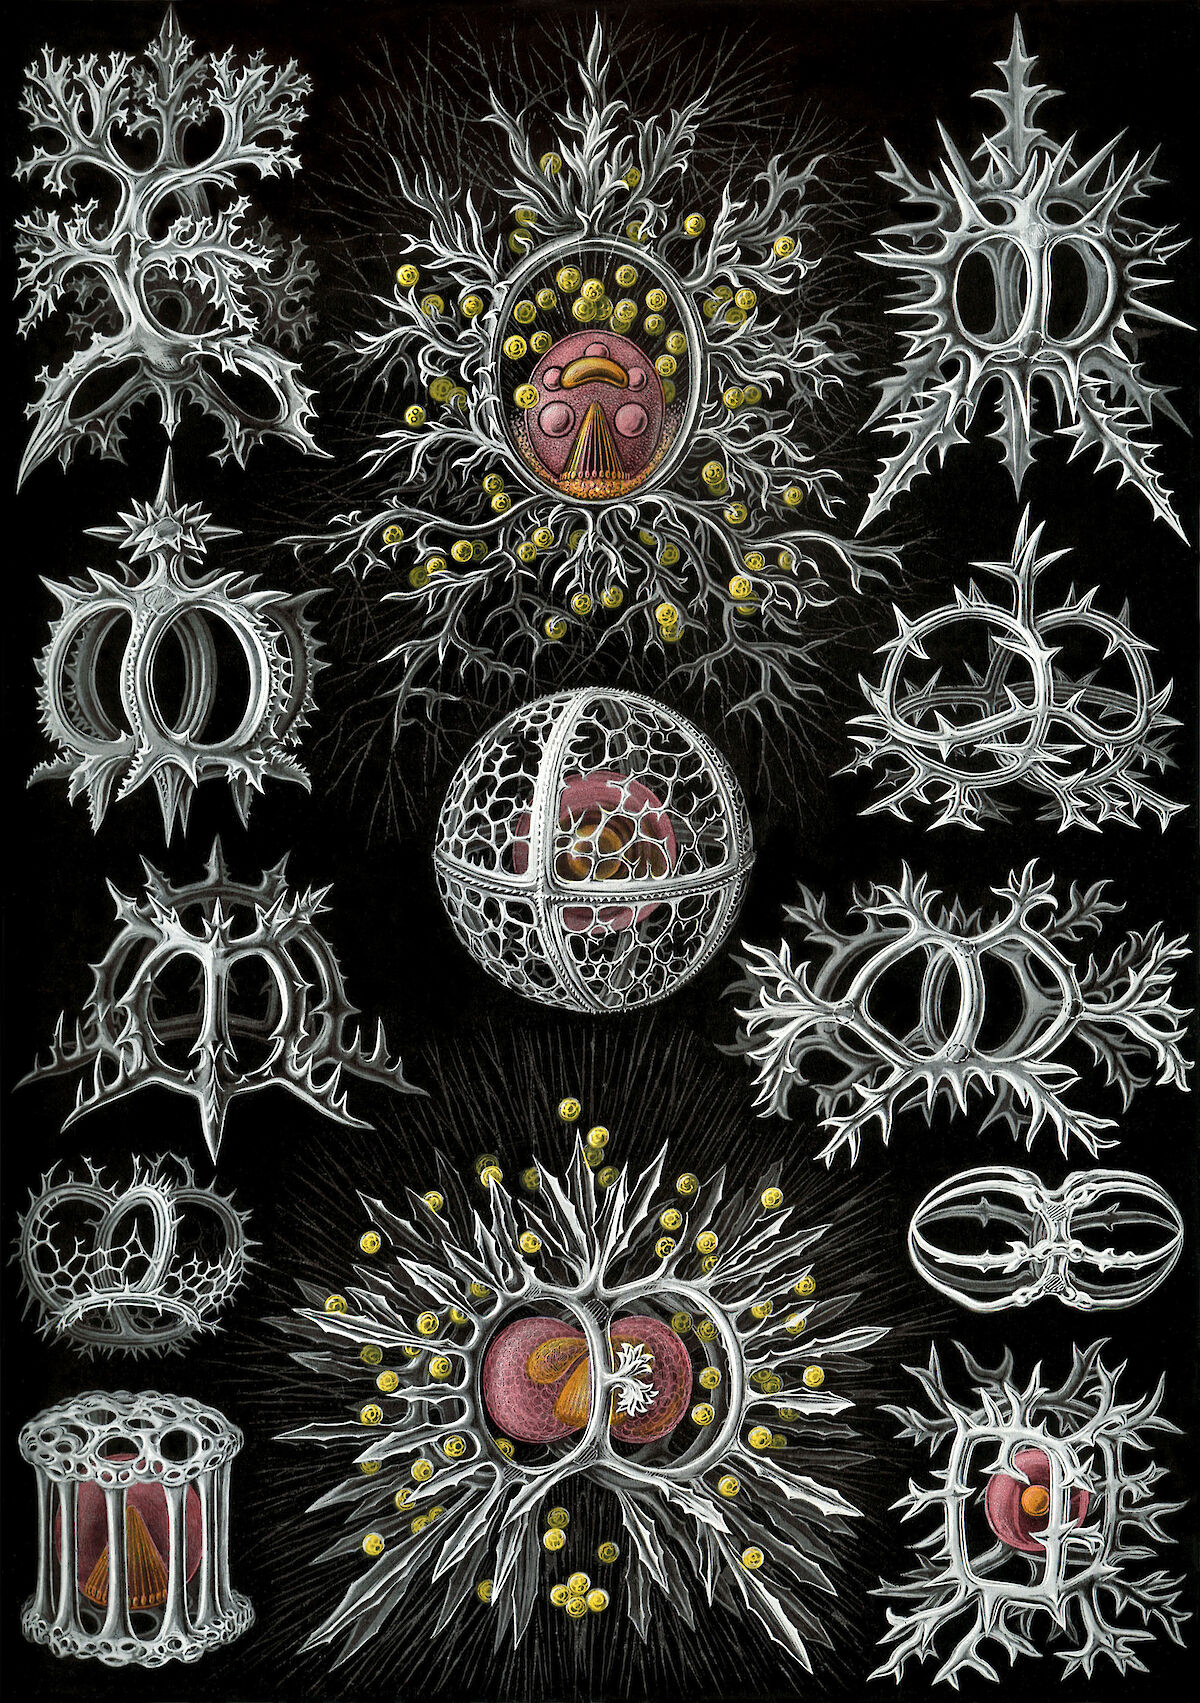 art-forms-in-nature-plate-71-stephoidea-by-ernst-haeckel